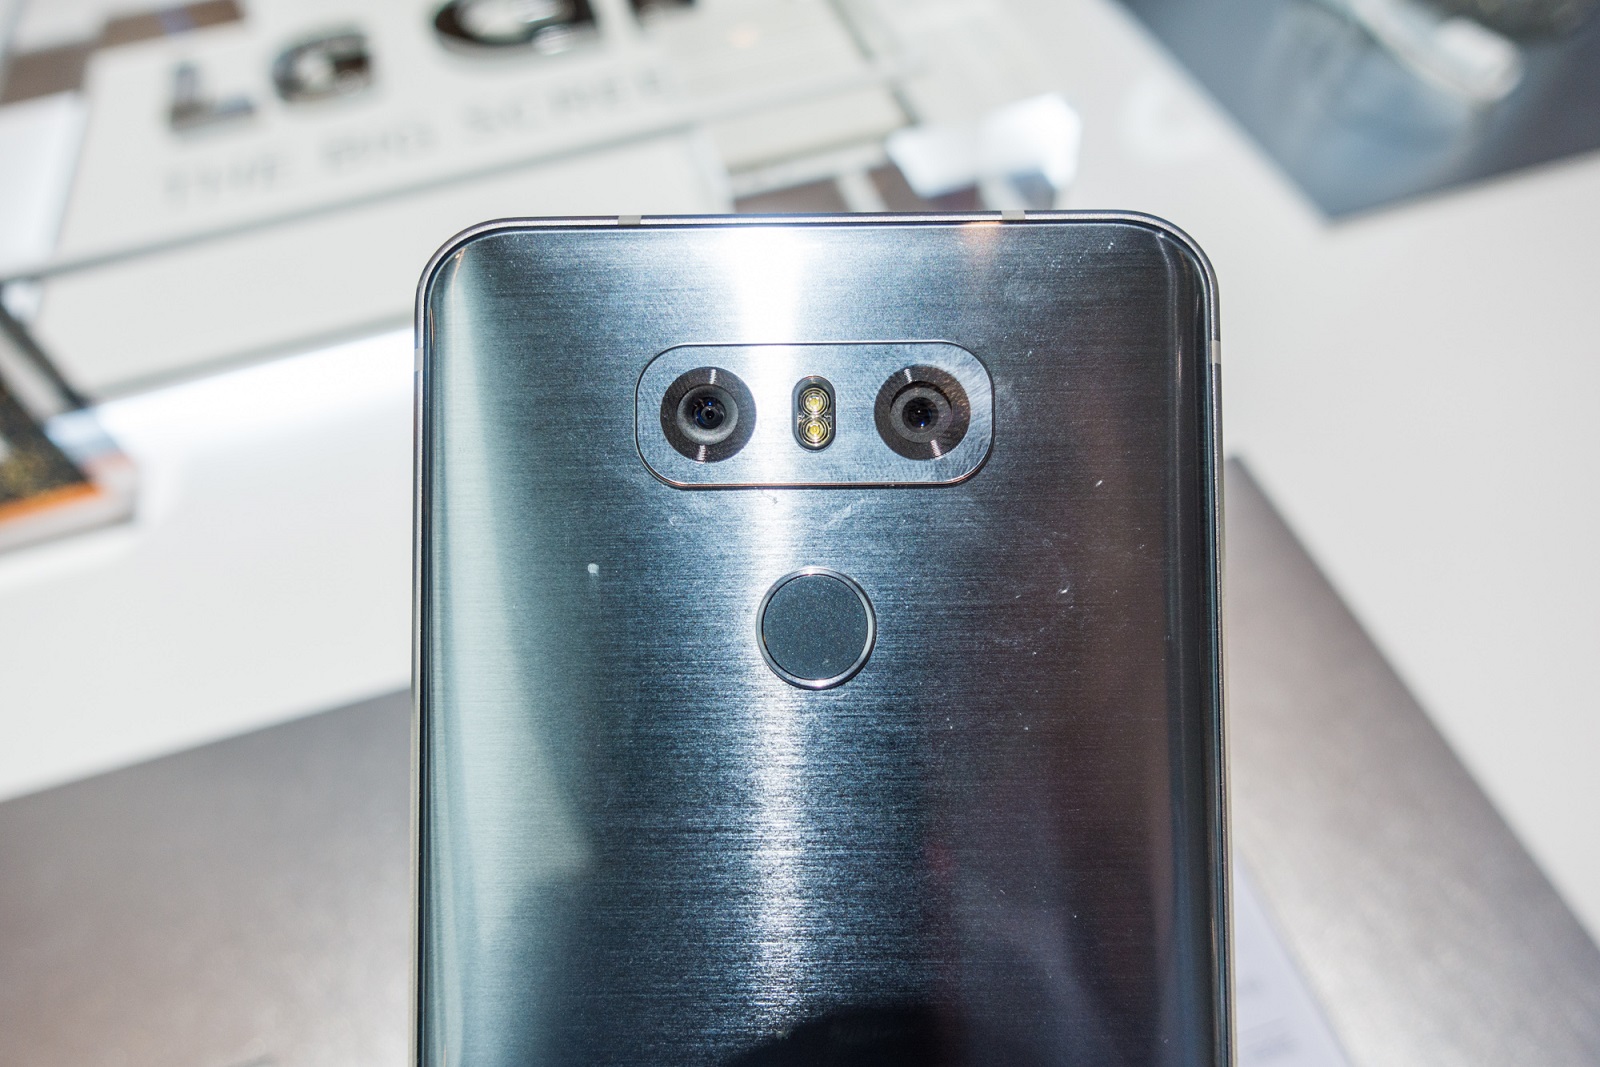 MWC 2017: LG takes off with its G6